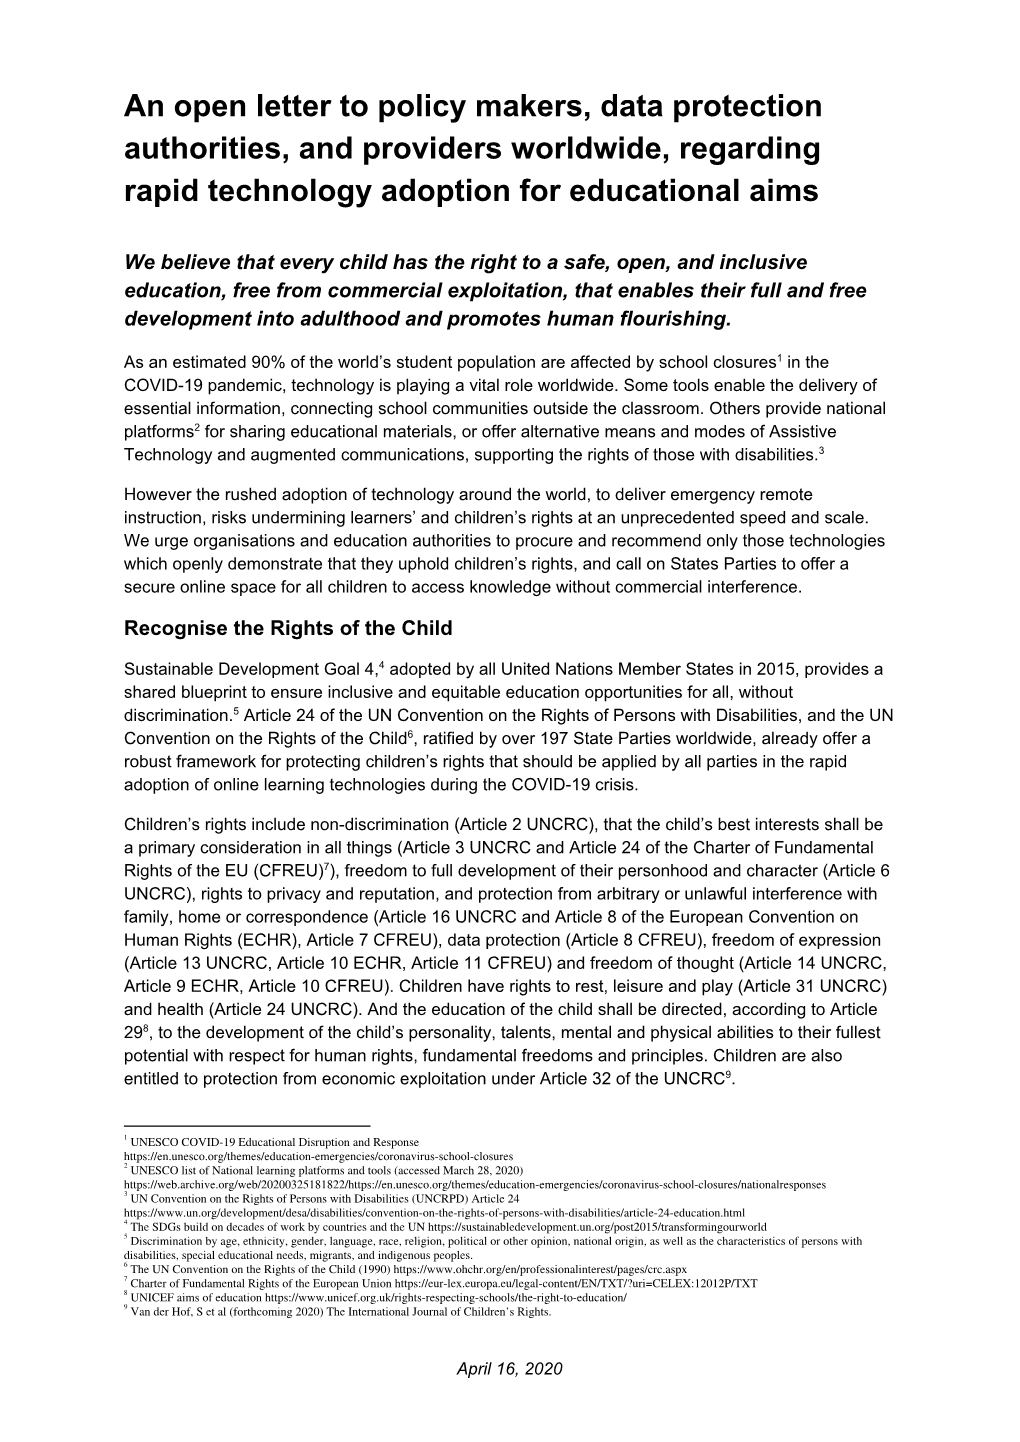 An Open Letter to Policy Makers, Data Protection Authorities, and Providers Worldwide, Regarding Rapid Technology Adoption for Educational Aims